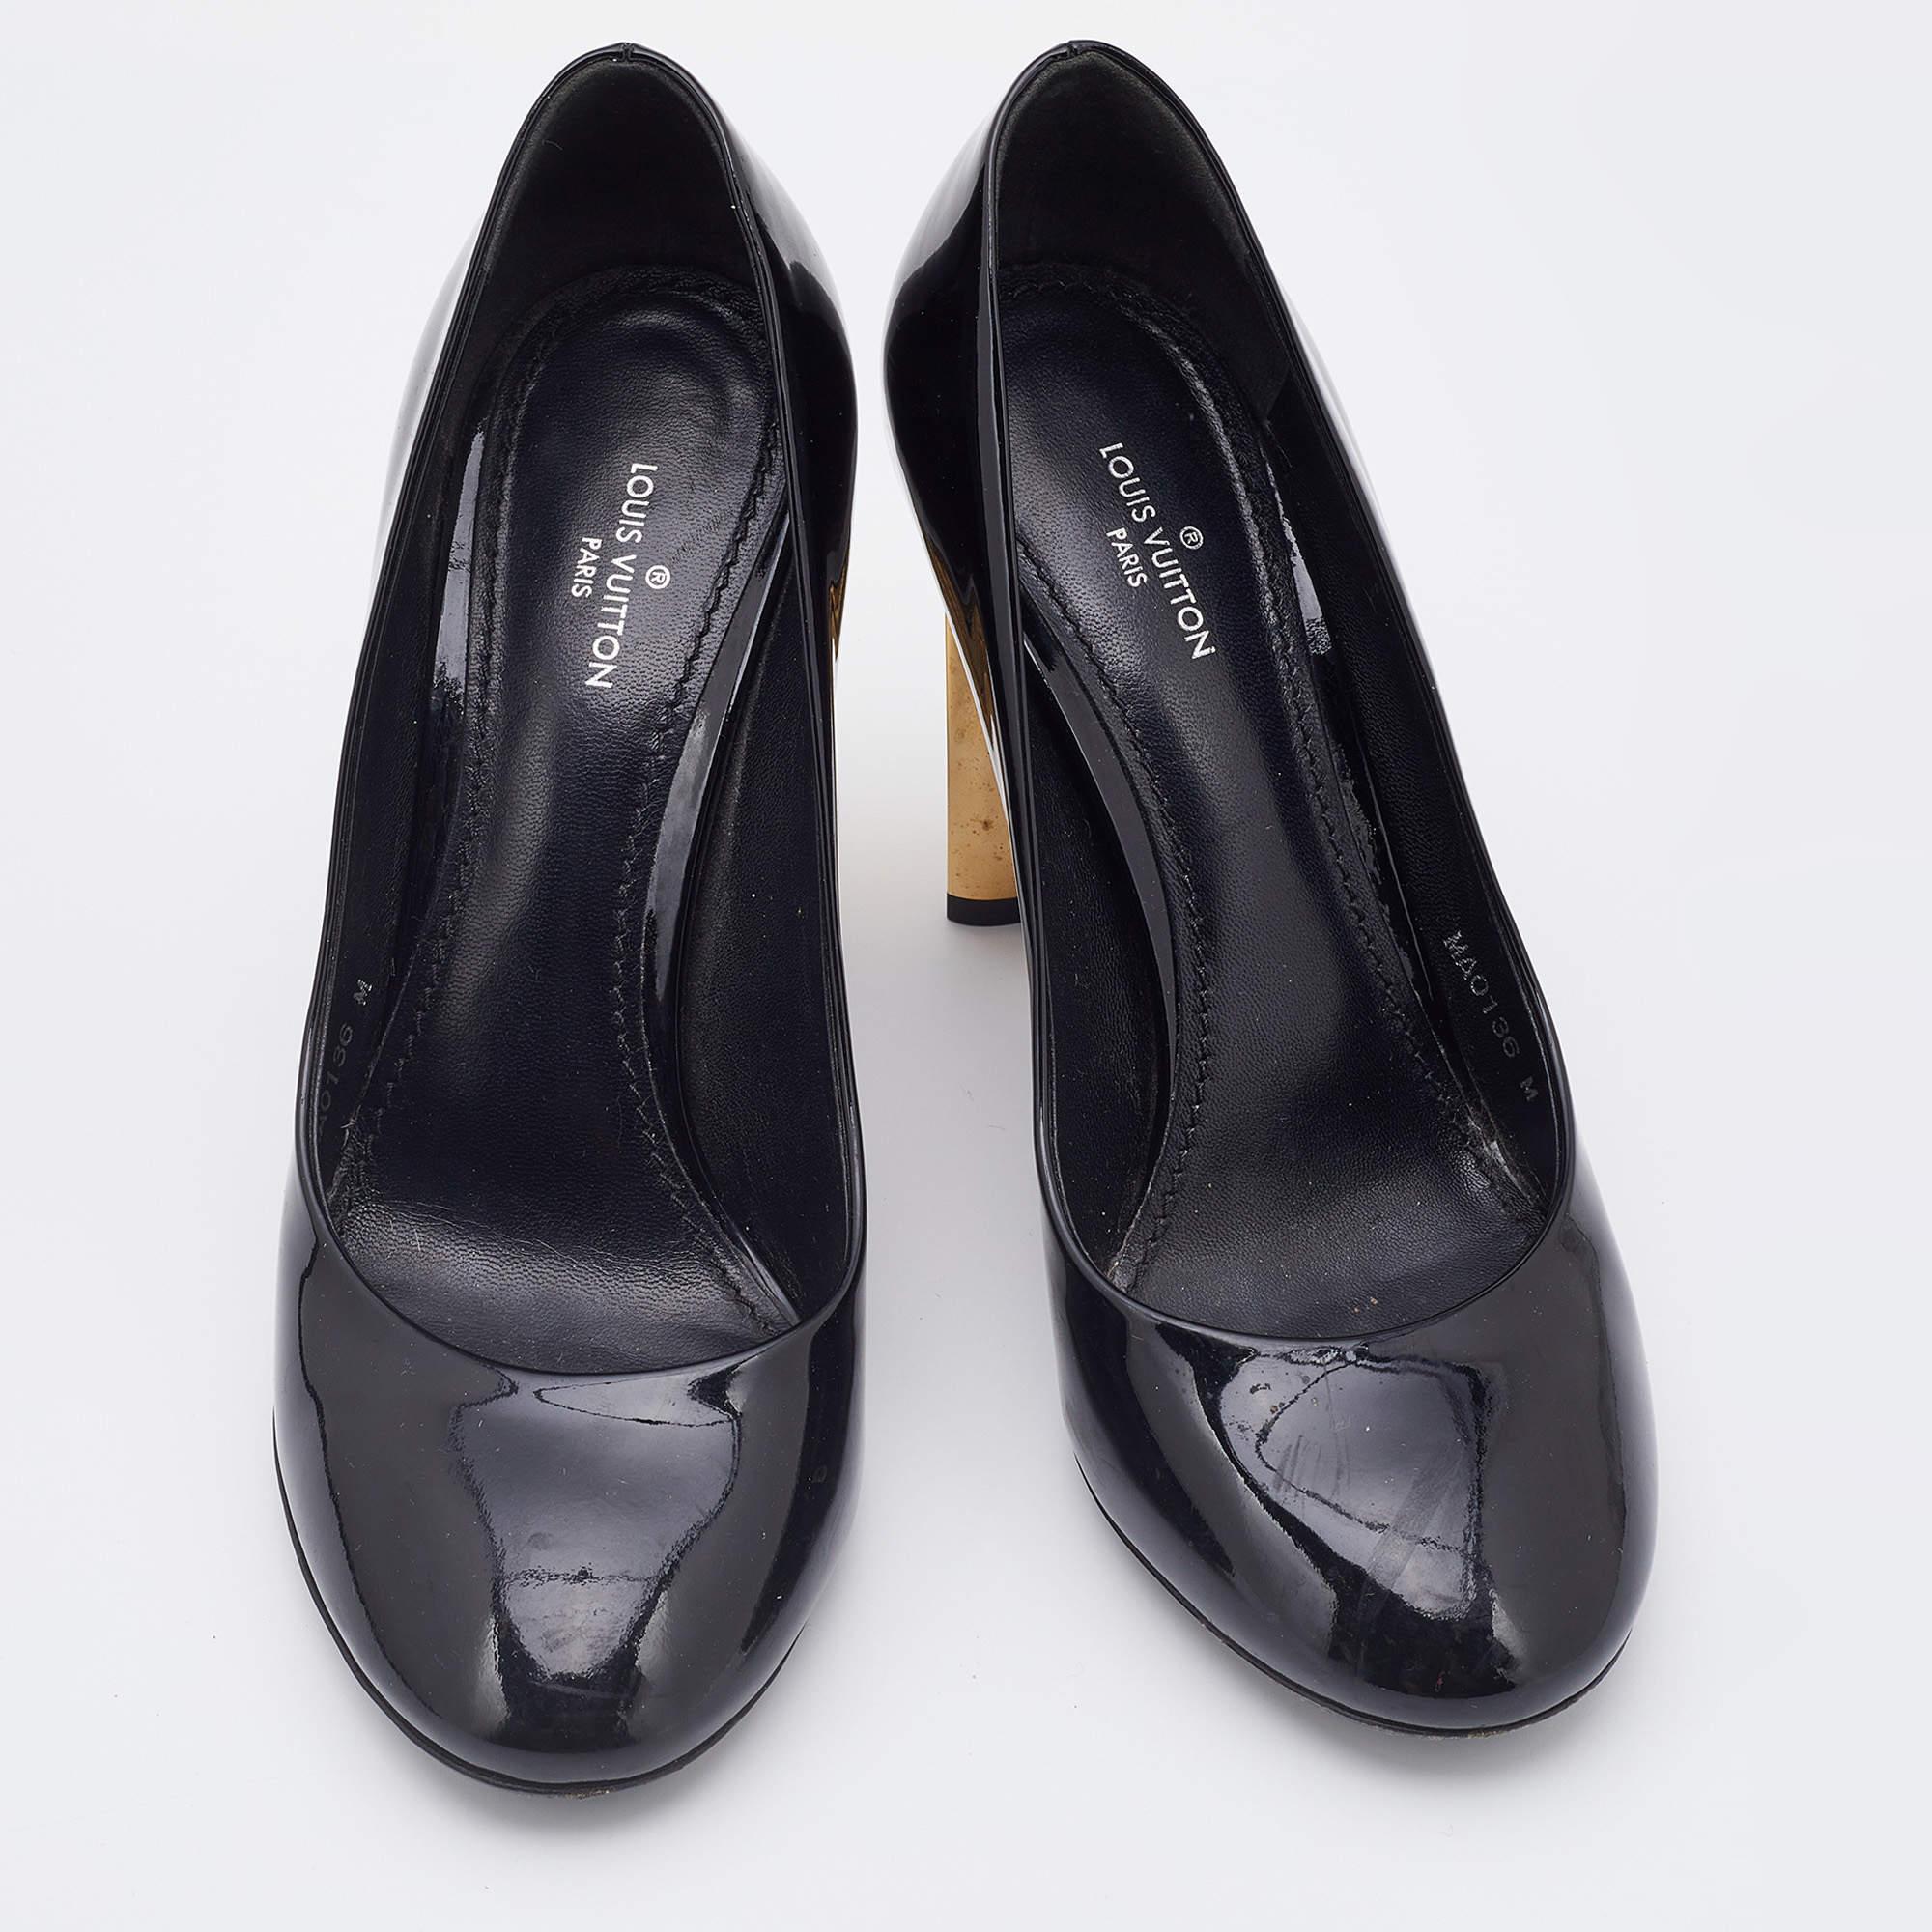 These pumps are a great choice if you’re looking to add a pair that's both classy and versatile. The pair has been made using only the best kind of materials to ensure lasting wear.

